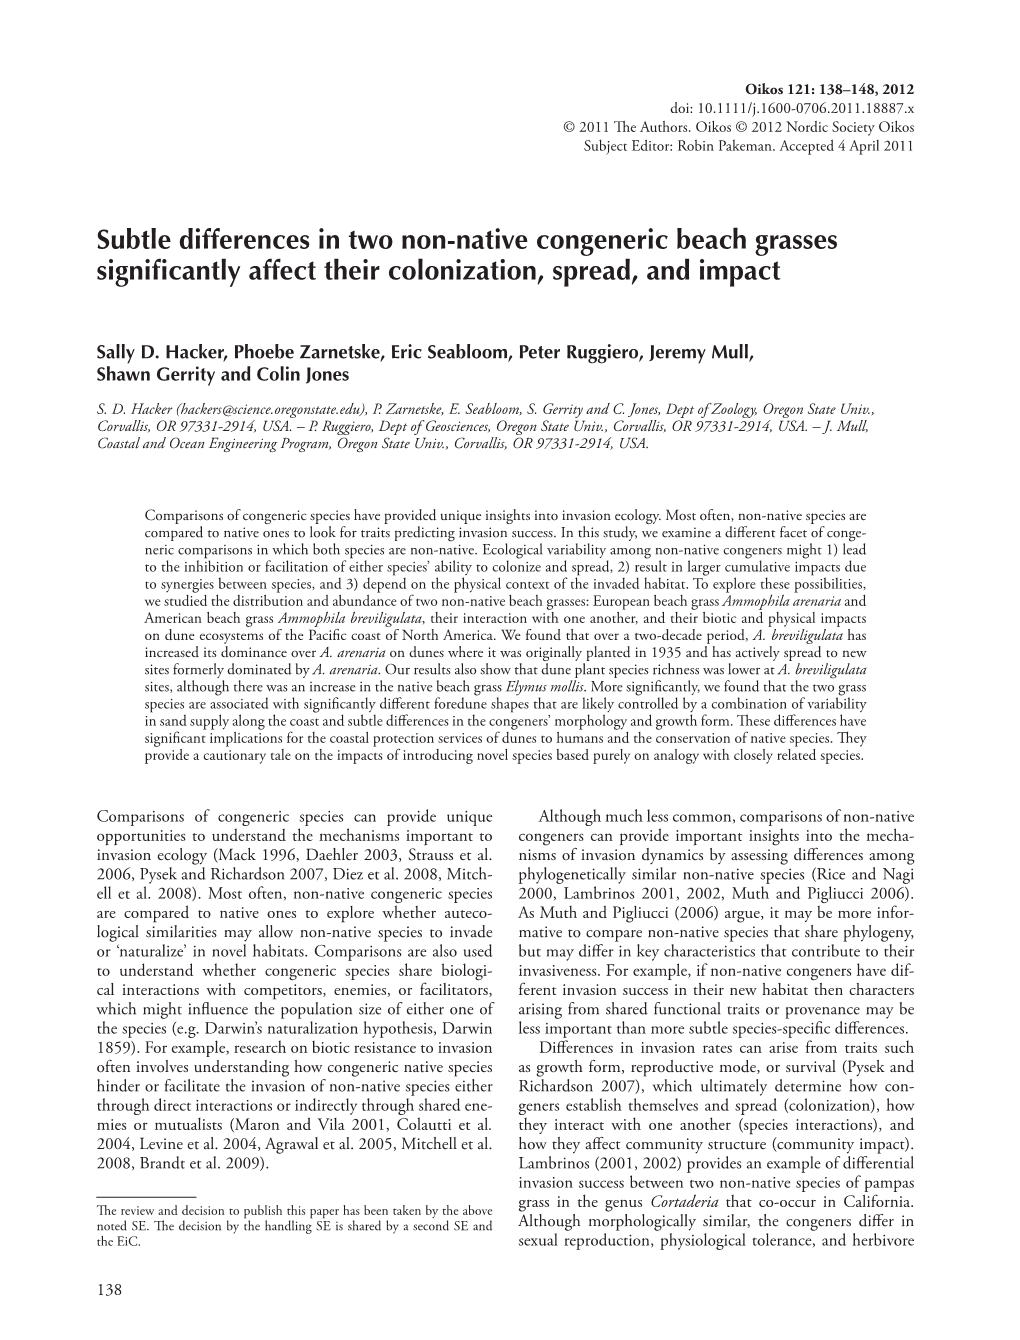 Subtle Differences in Two Nonnative Congeneric Beach Grasses Significantly Affect Their Colonization, Spread, and Impact